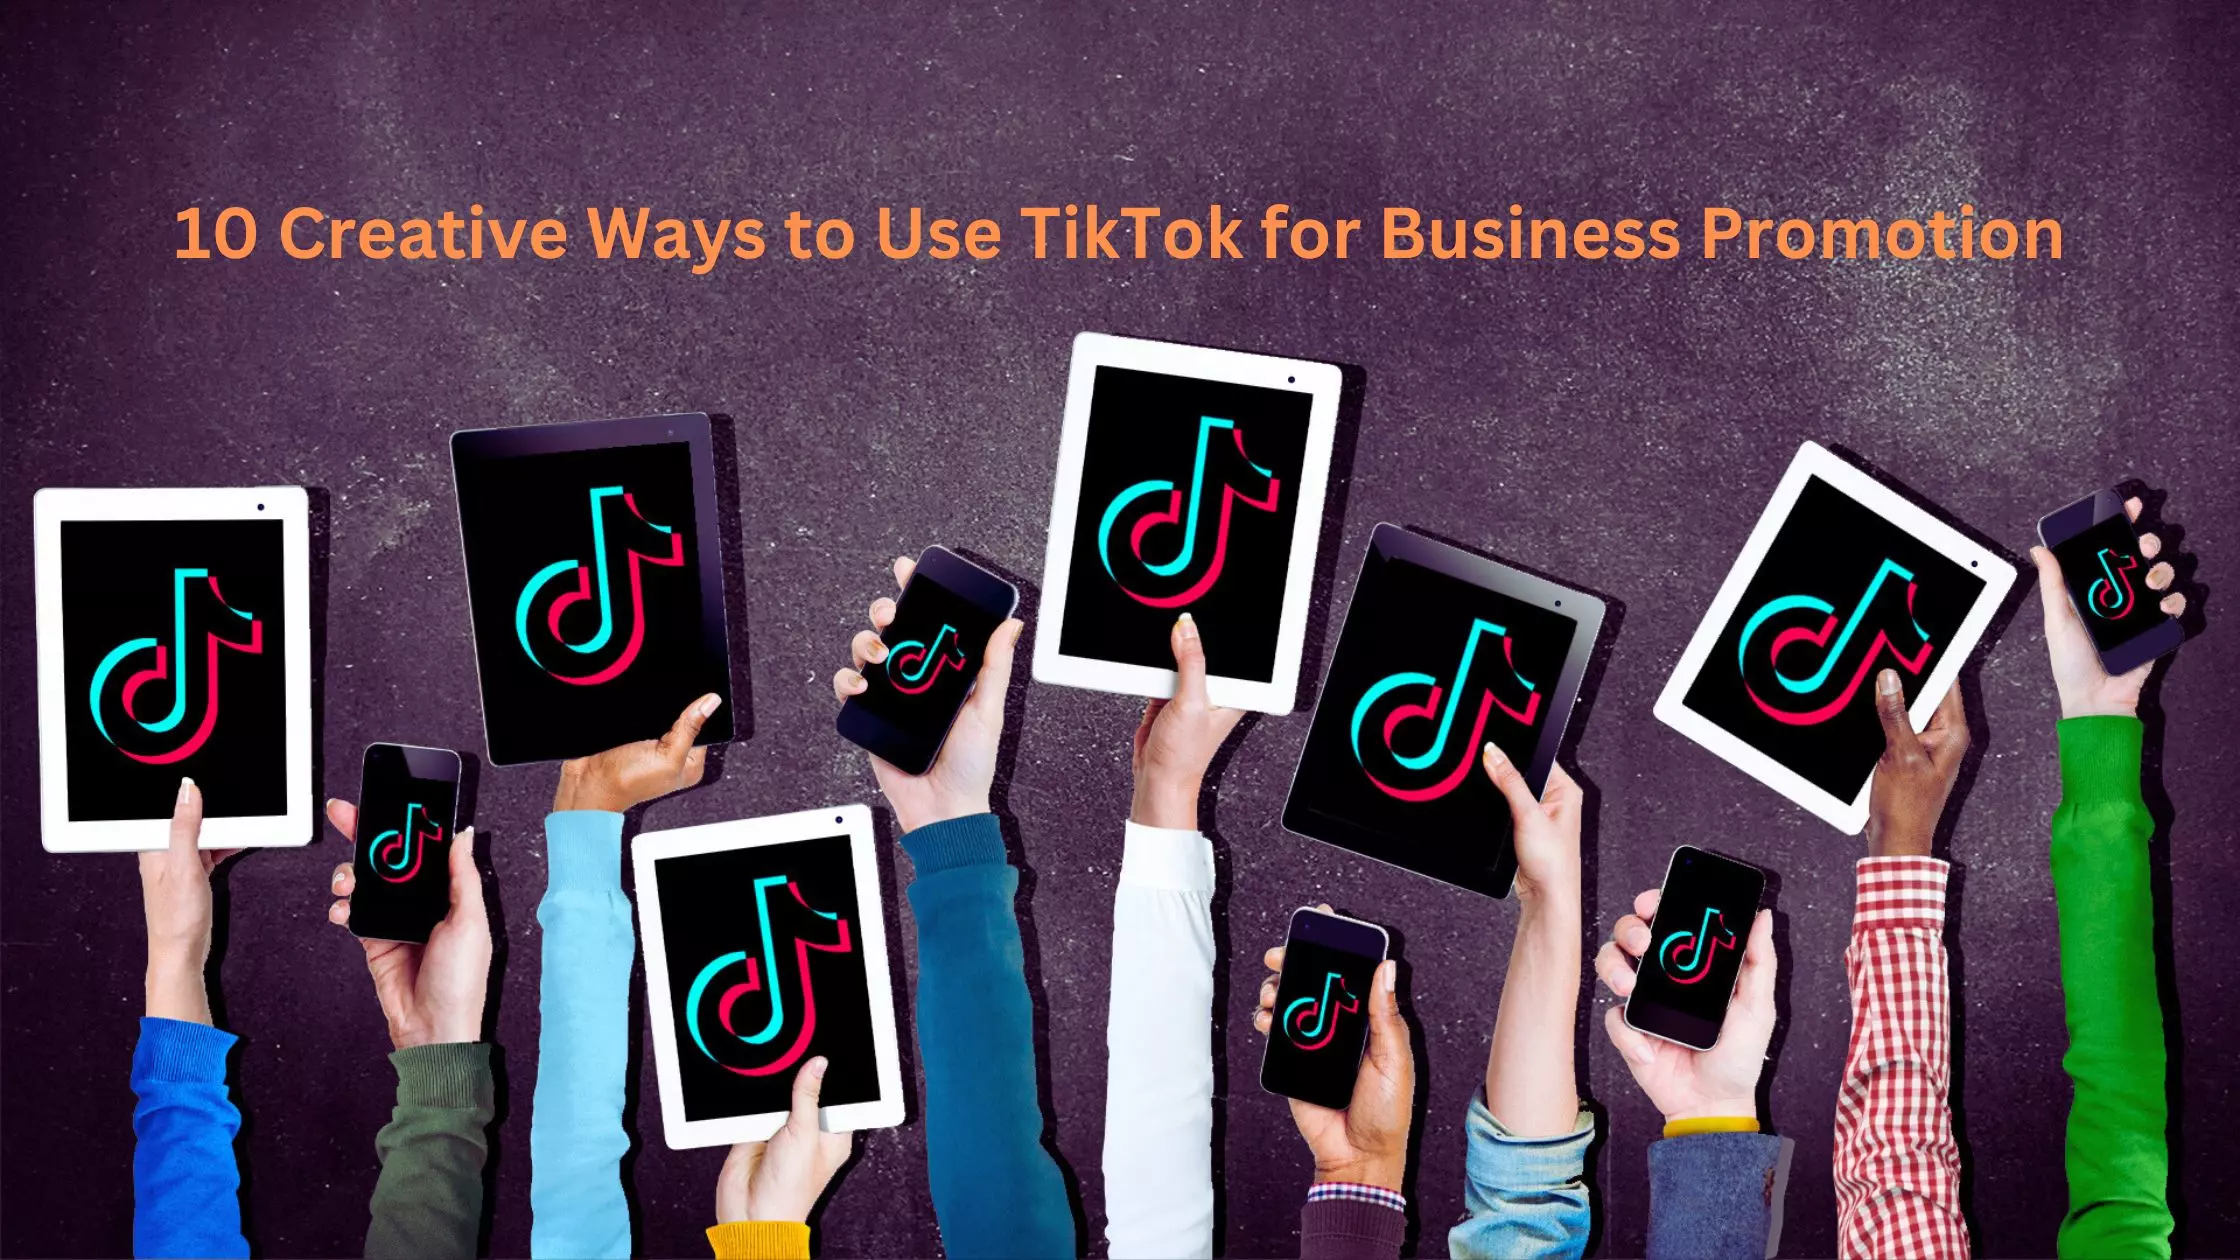 10 Creative Ways to Use TikTok for Business Promotion